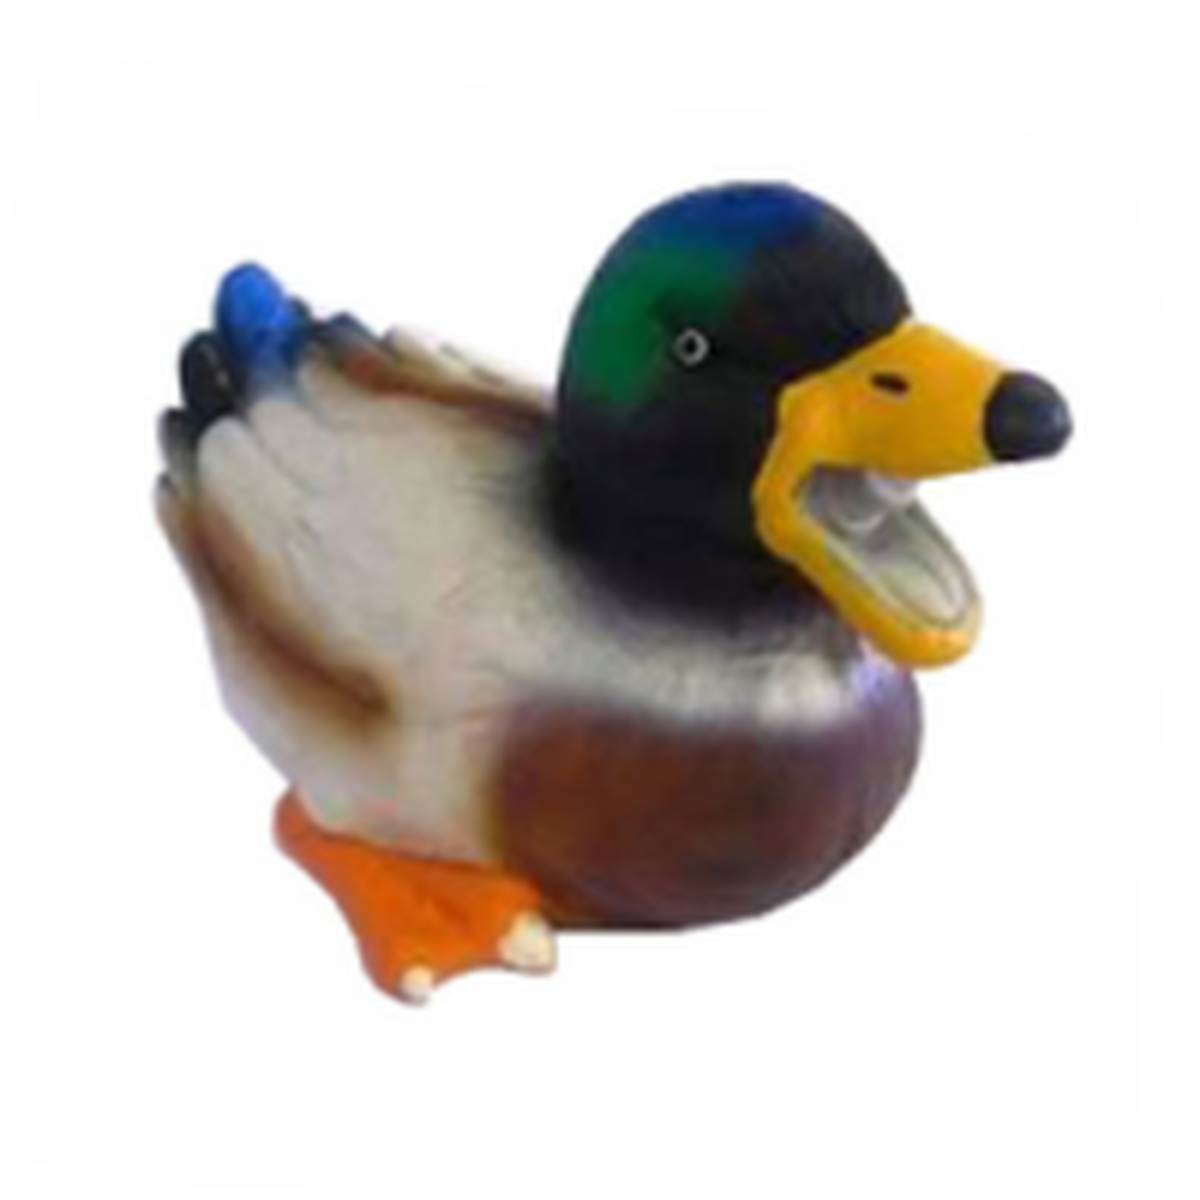 quacking duck toy